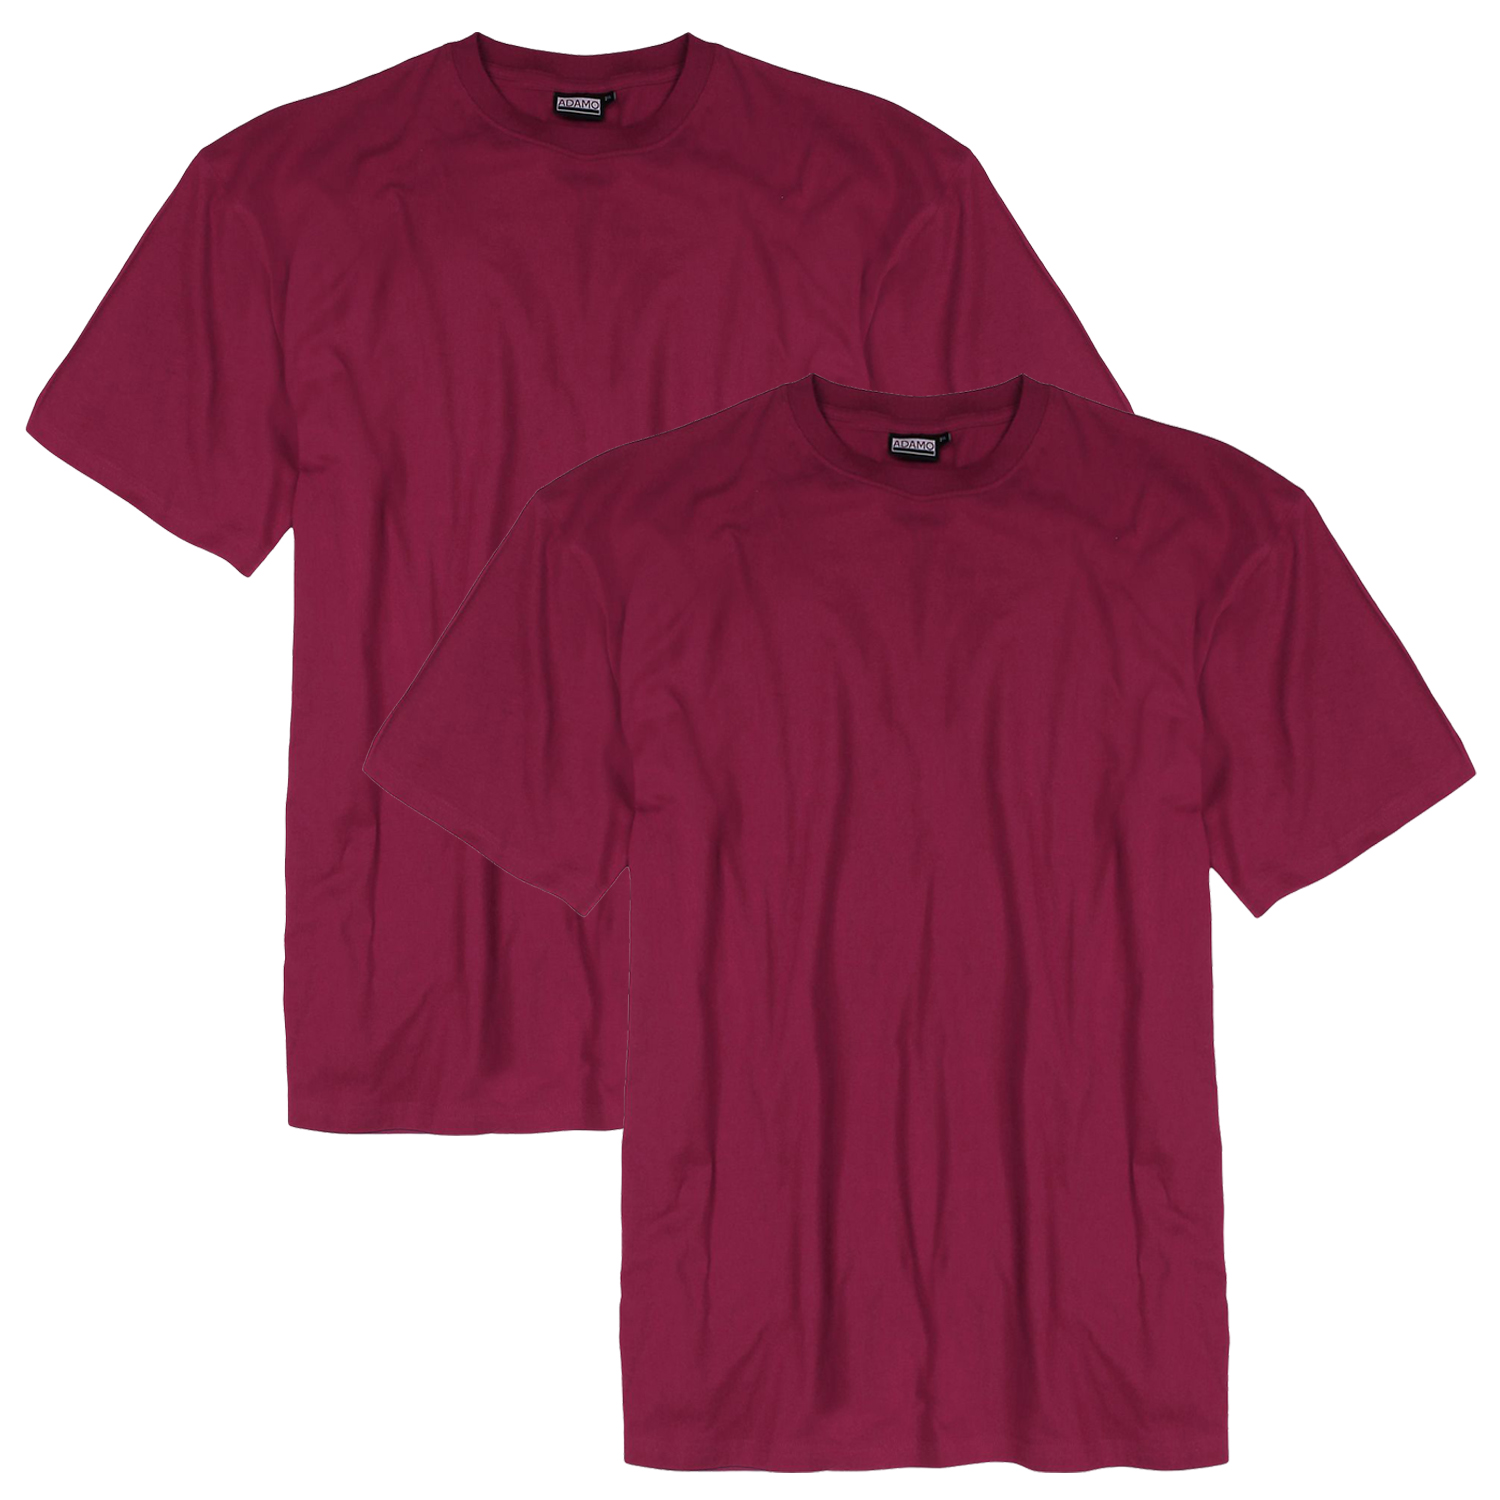 T-shirts in blackberry red COMFORT FIT series Marlon by Adamo for men up to oversize 12XL - double pack